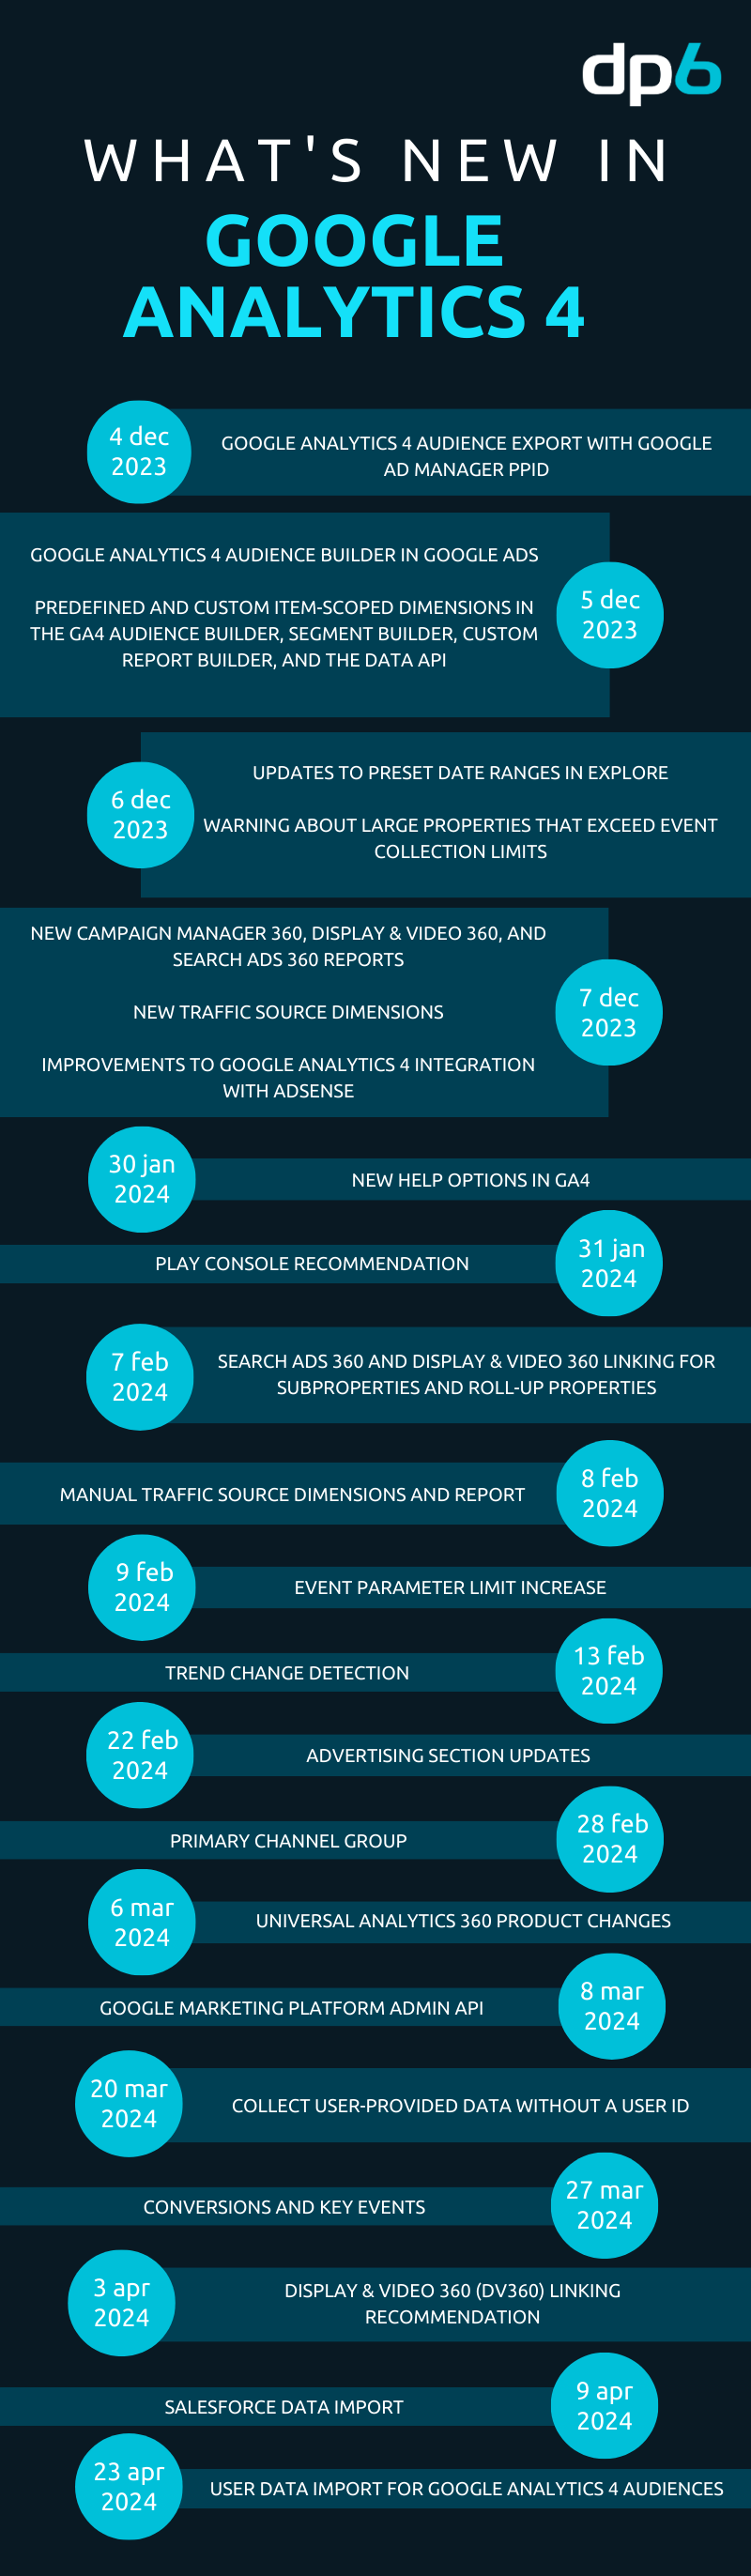 complete infographic with all the changes and a breakdown of everything that’s happened so far in Google Analytics 4